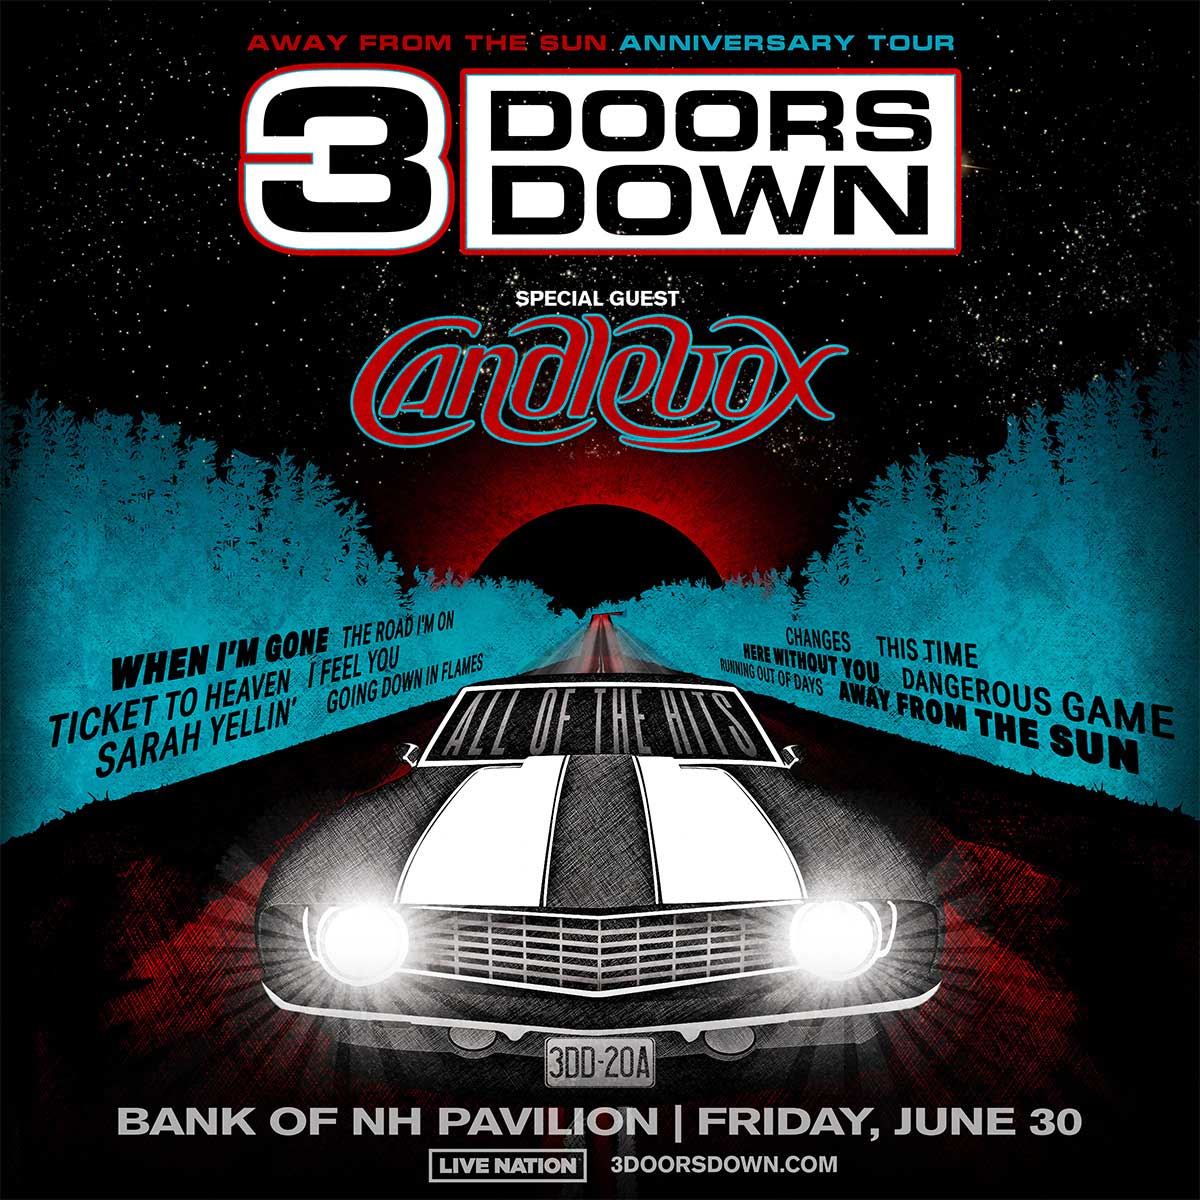 LAST CHANCE To Win Tickets To 3 Doors Down At The Bank Of NH Pavilion!